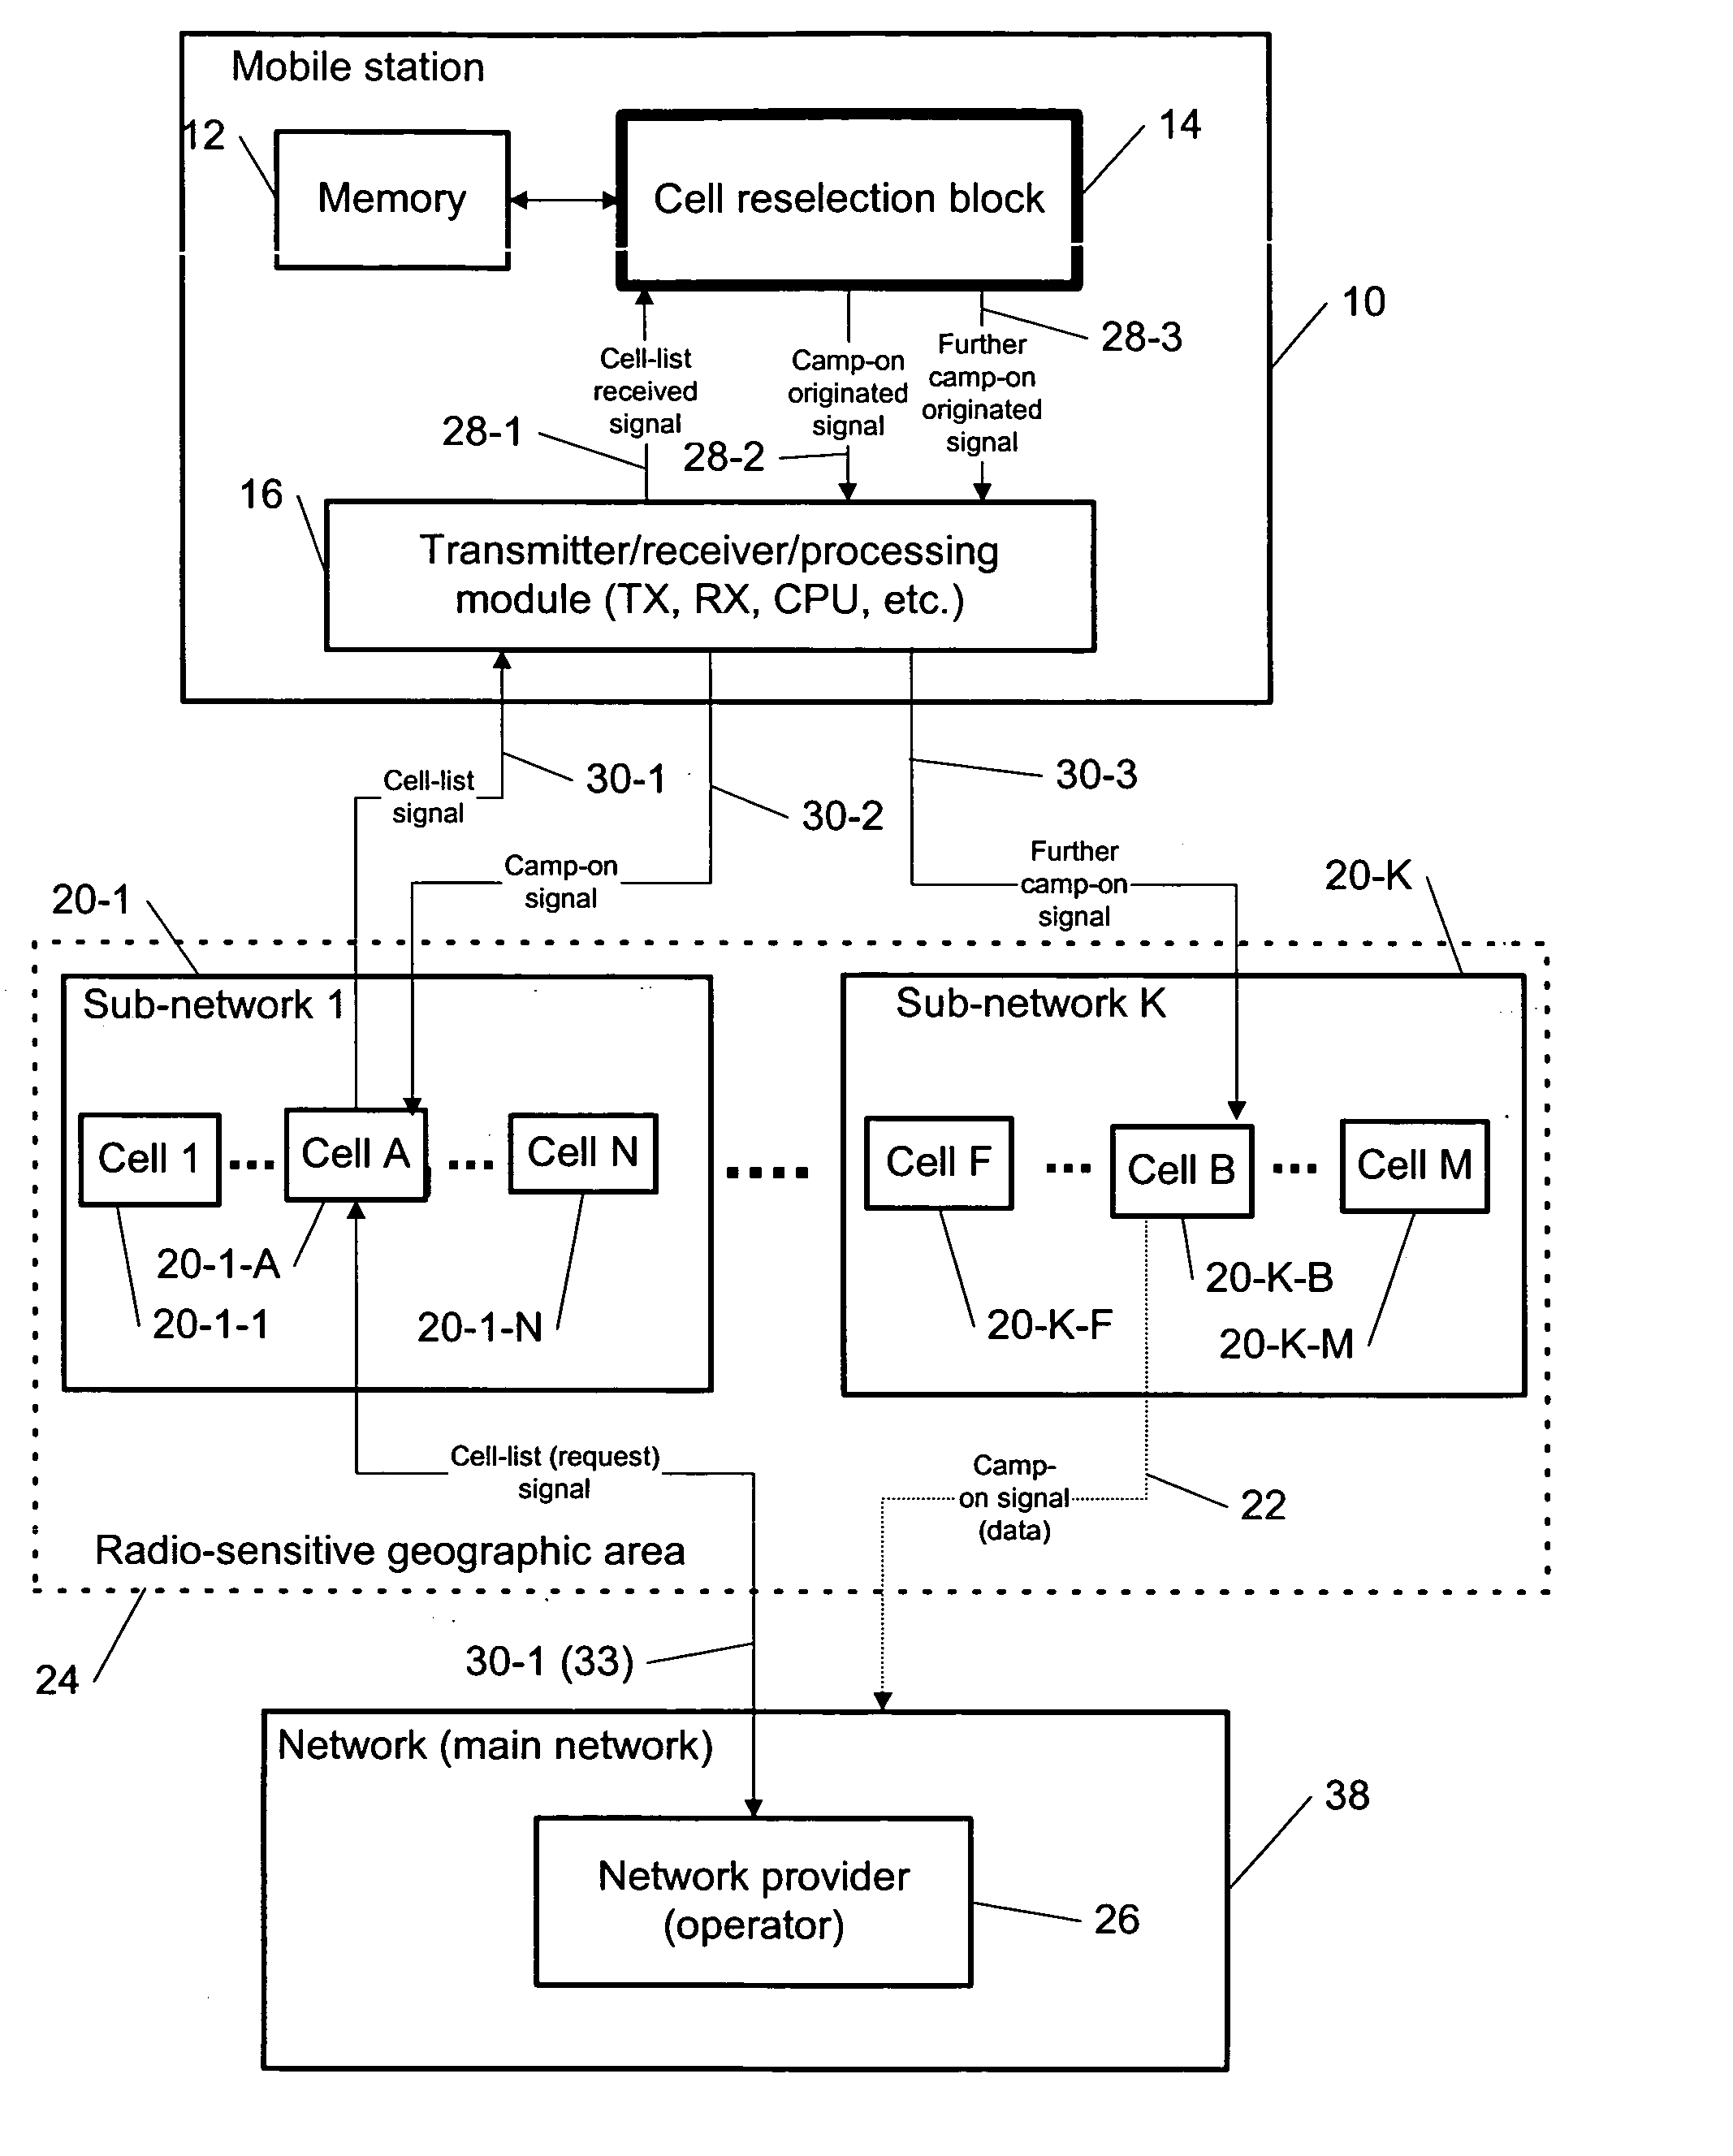 Cell reselection for improving network interconnection